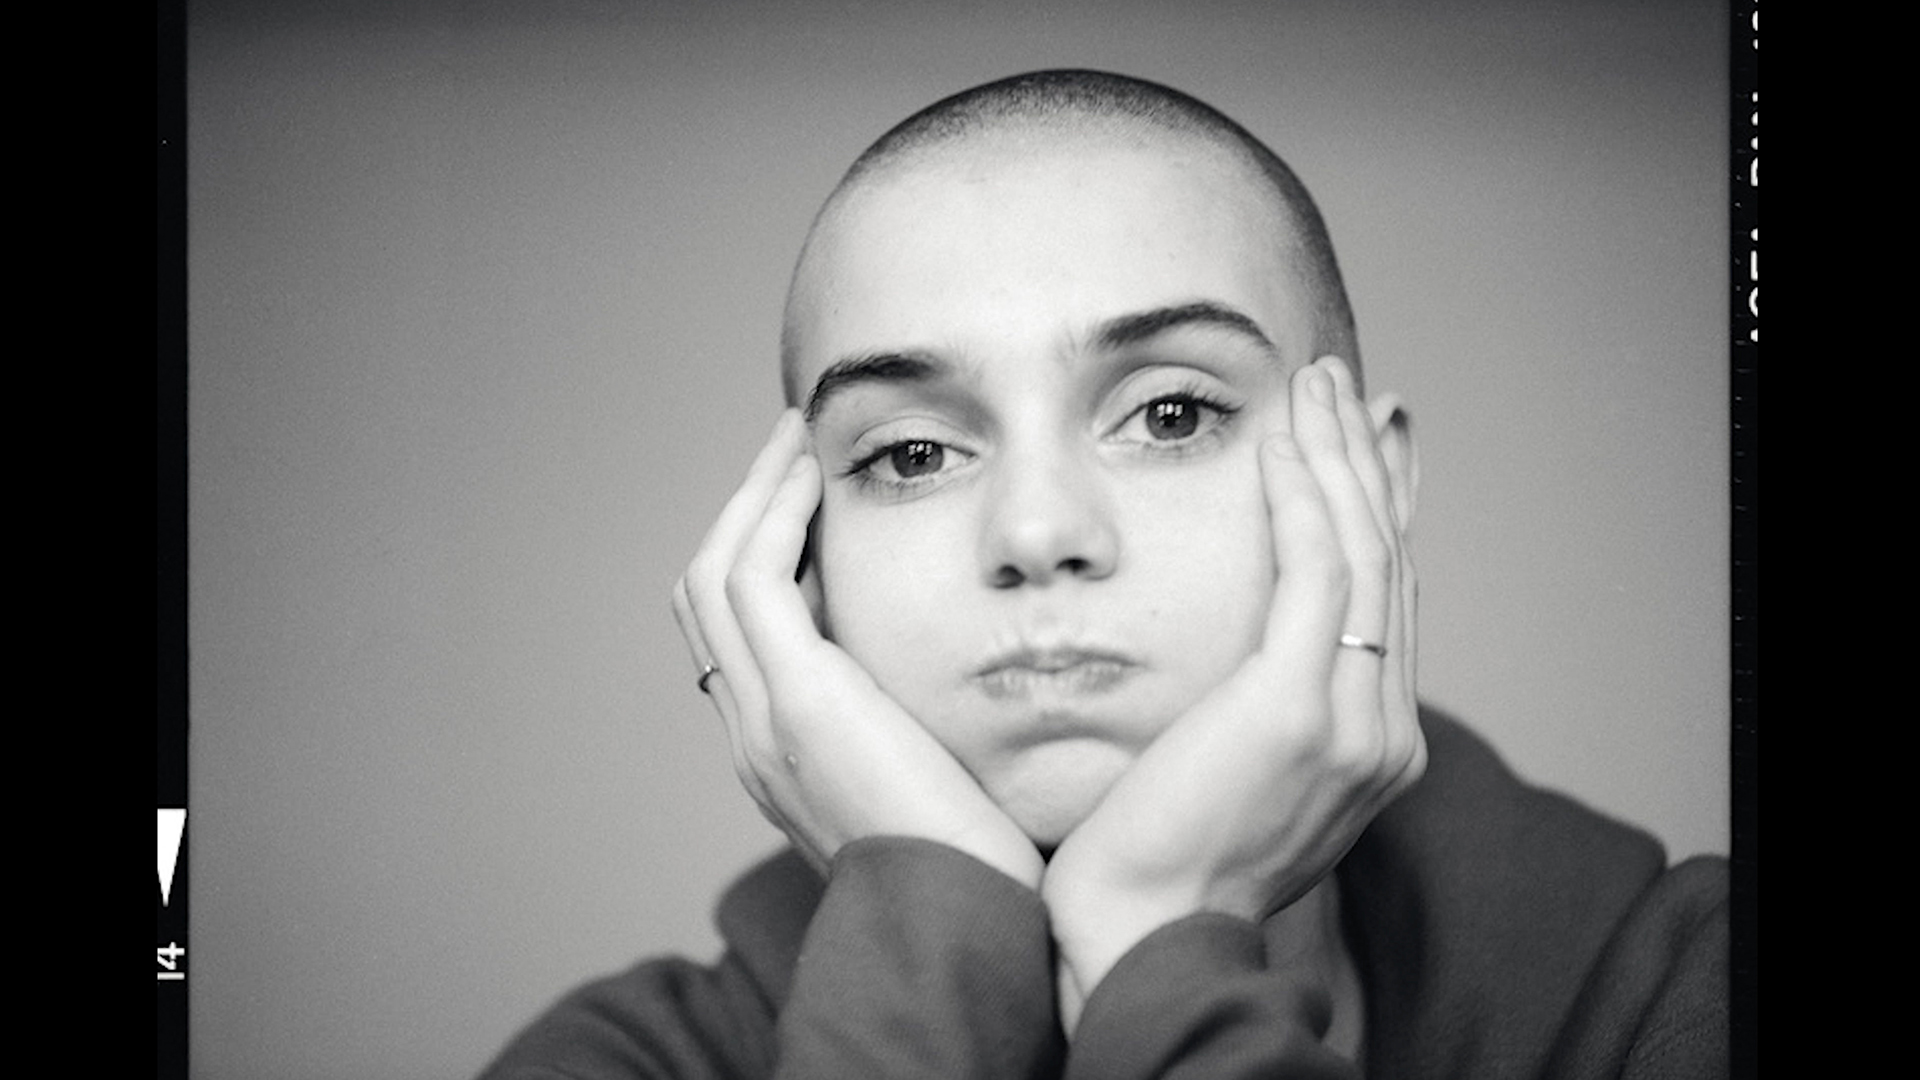 A young Sinéad O’Connor